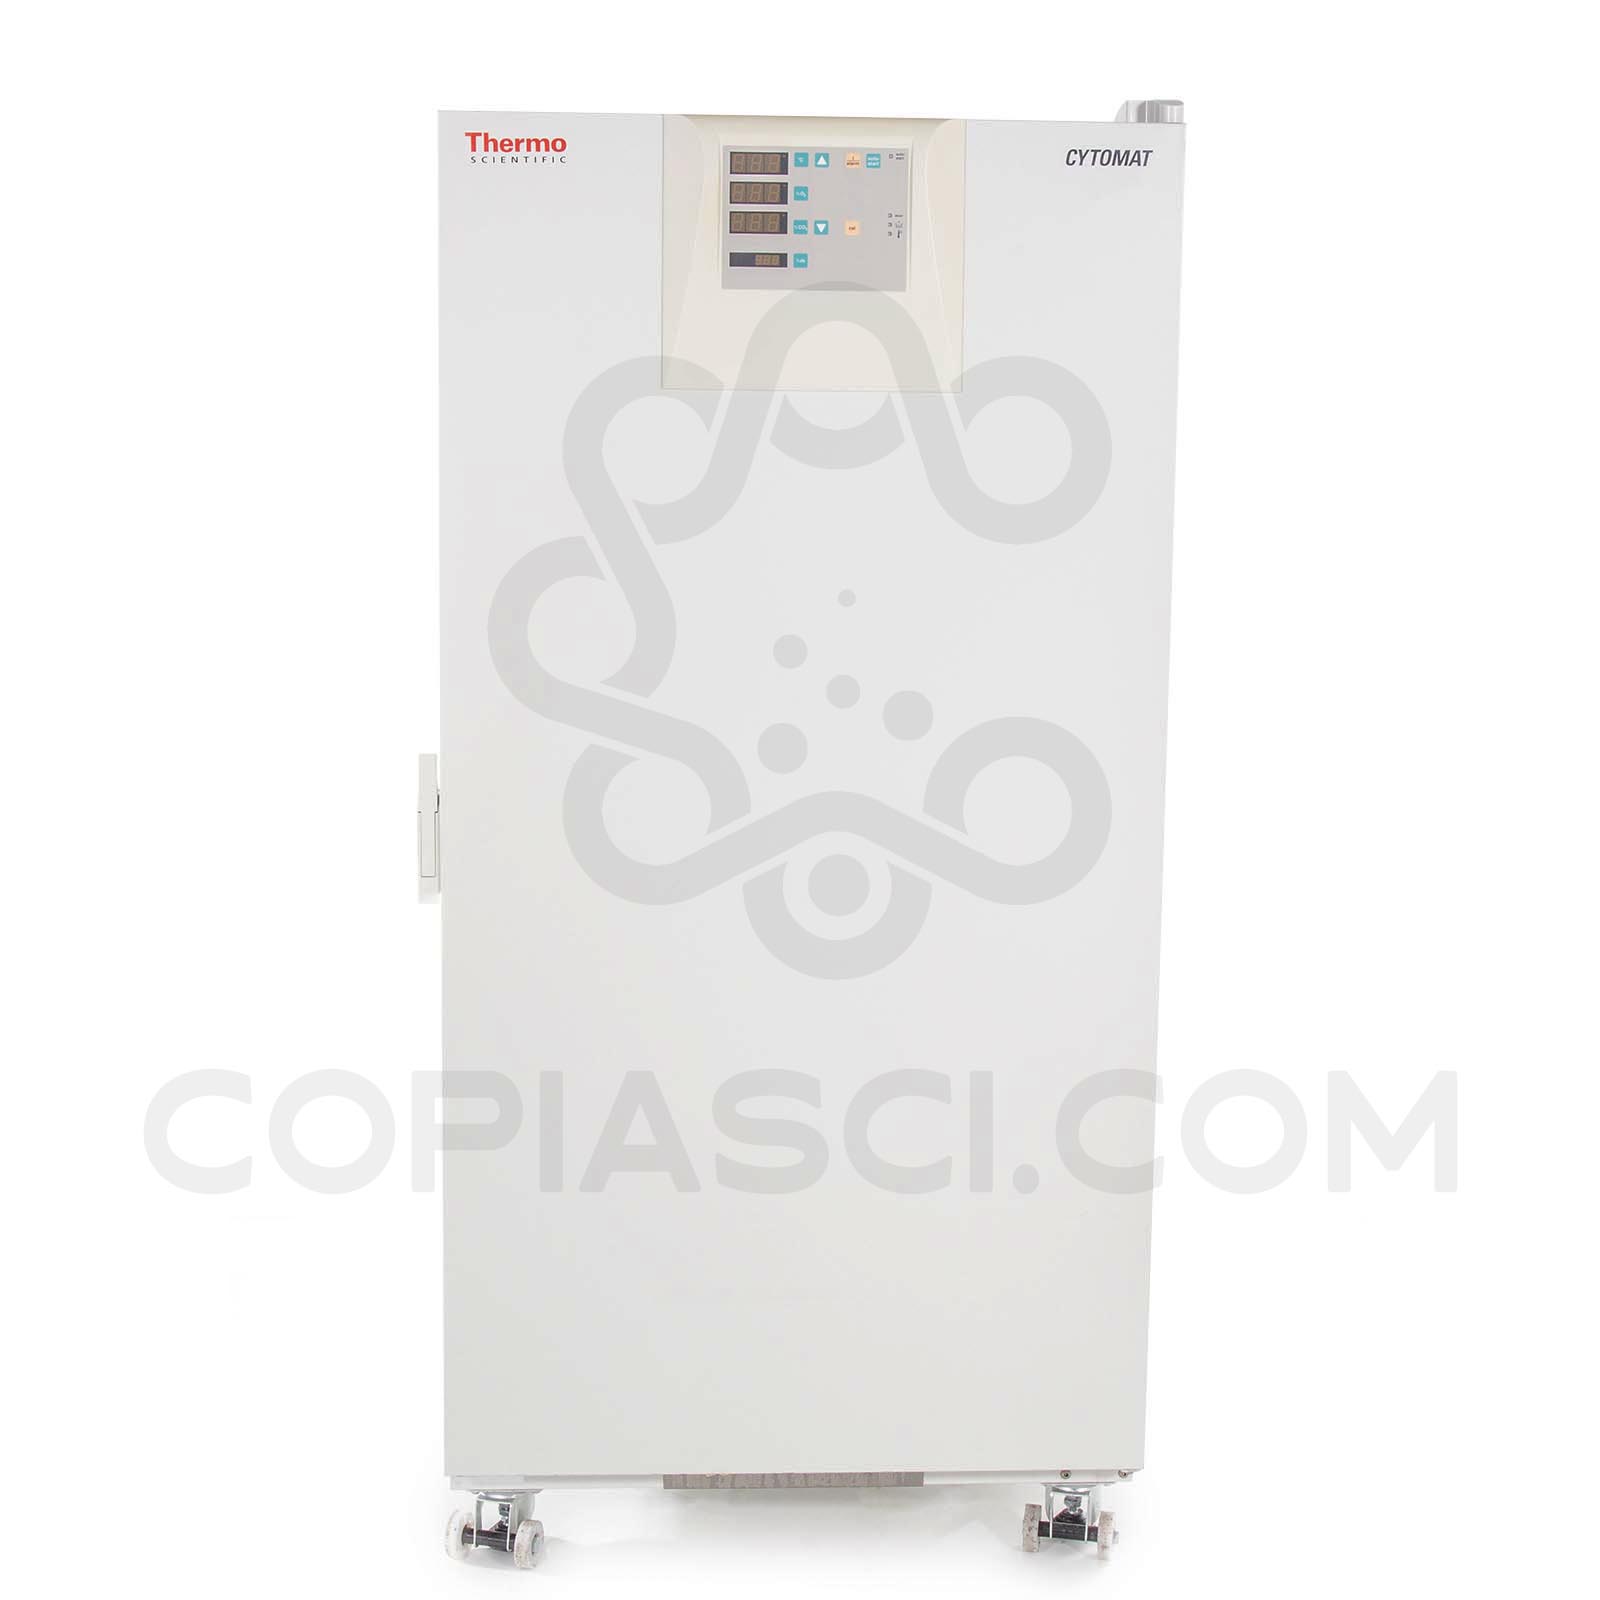 Thermo Electron NA Incubator:Automated Cytomat 24C 10